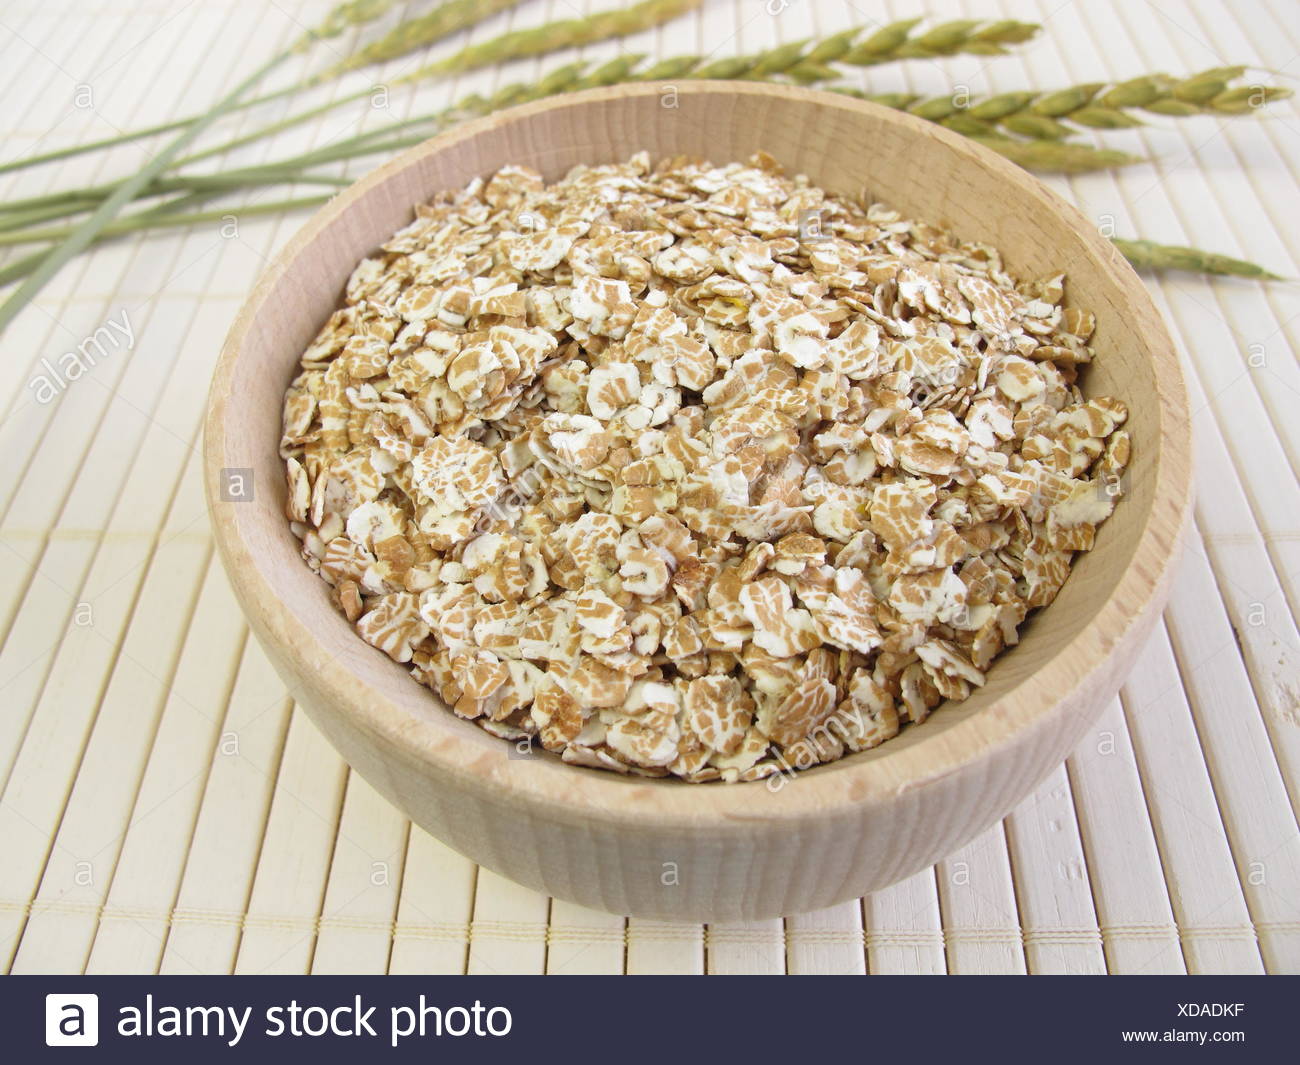 Spelt Flakes Grain Cereal Spelt Cereal Flakes Wholemeal